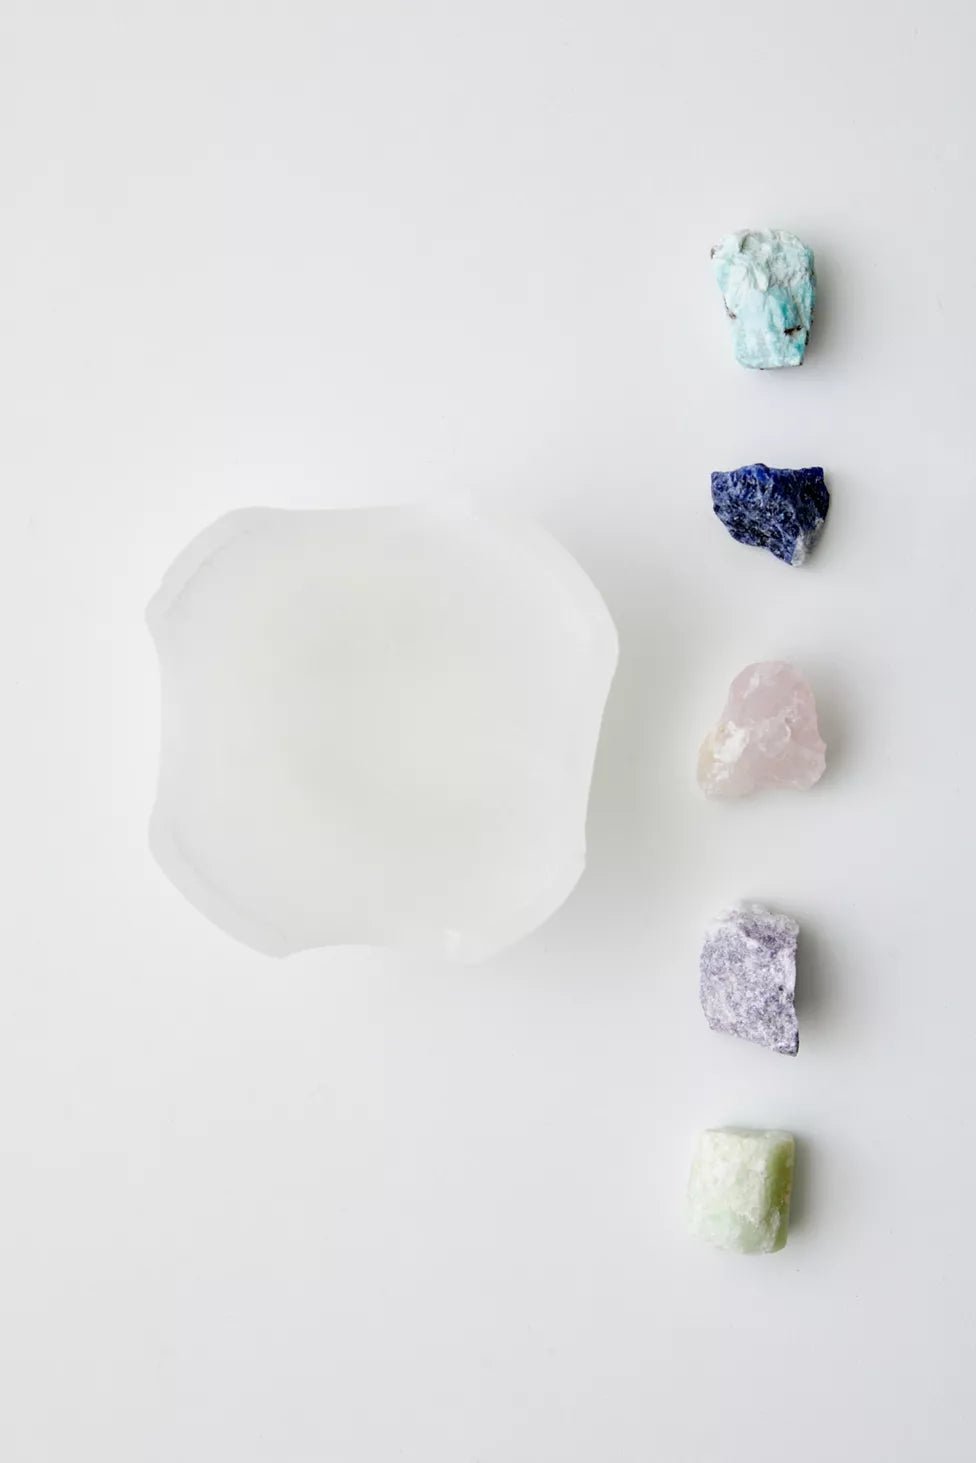 The Prettiest Healing Crystals in Selenite Charging Bowl - Ariana Ost